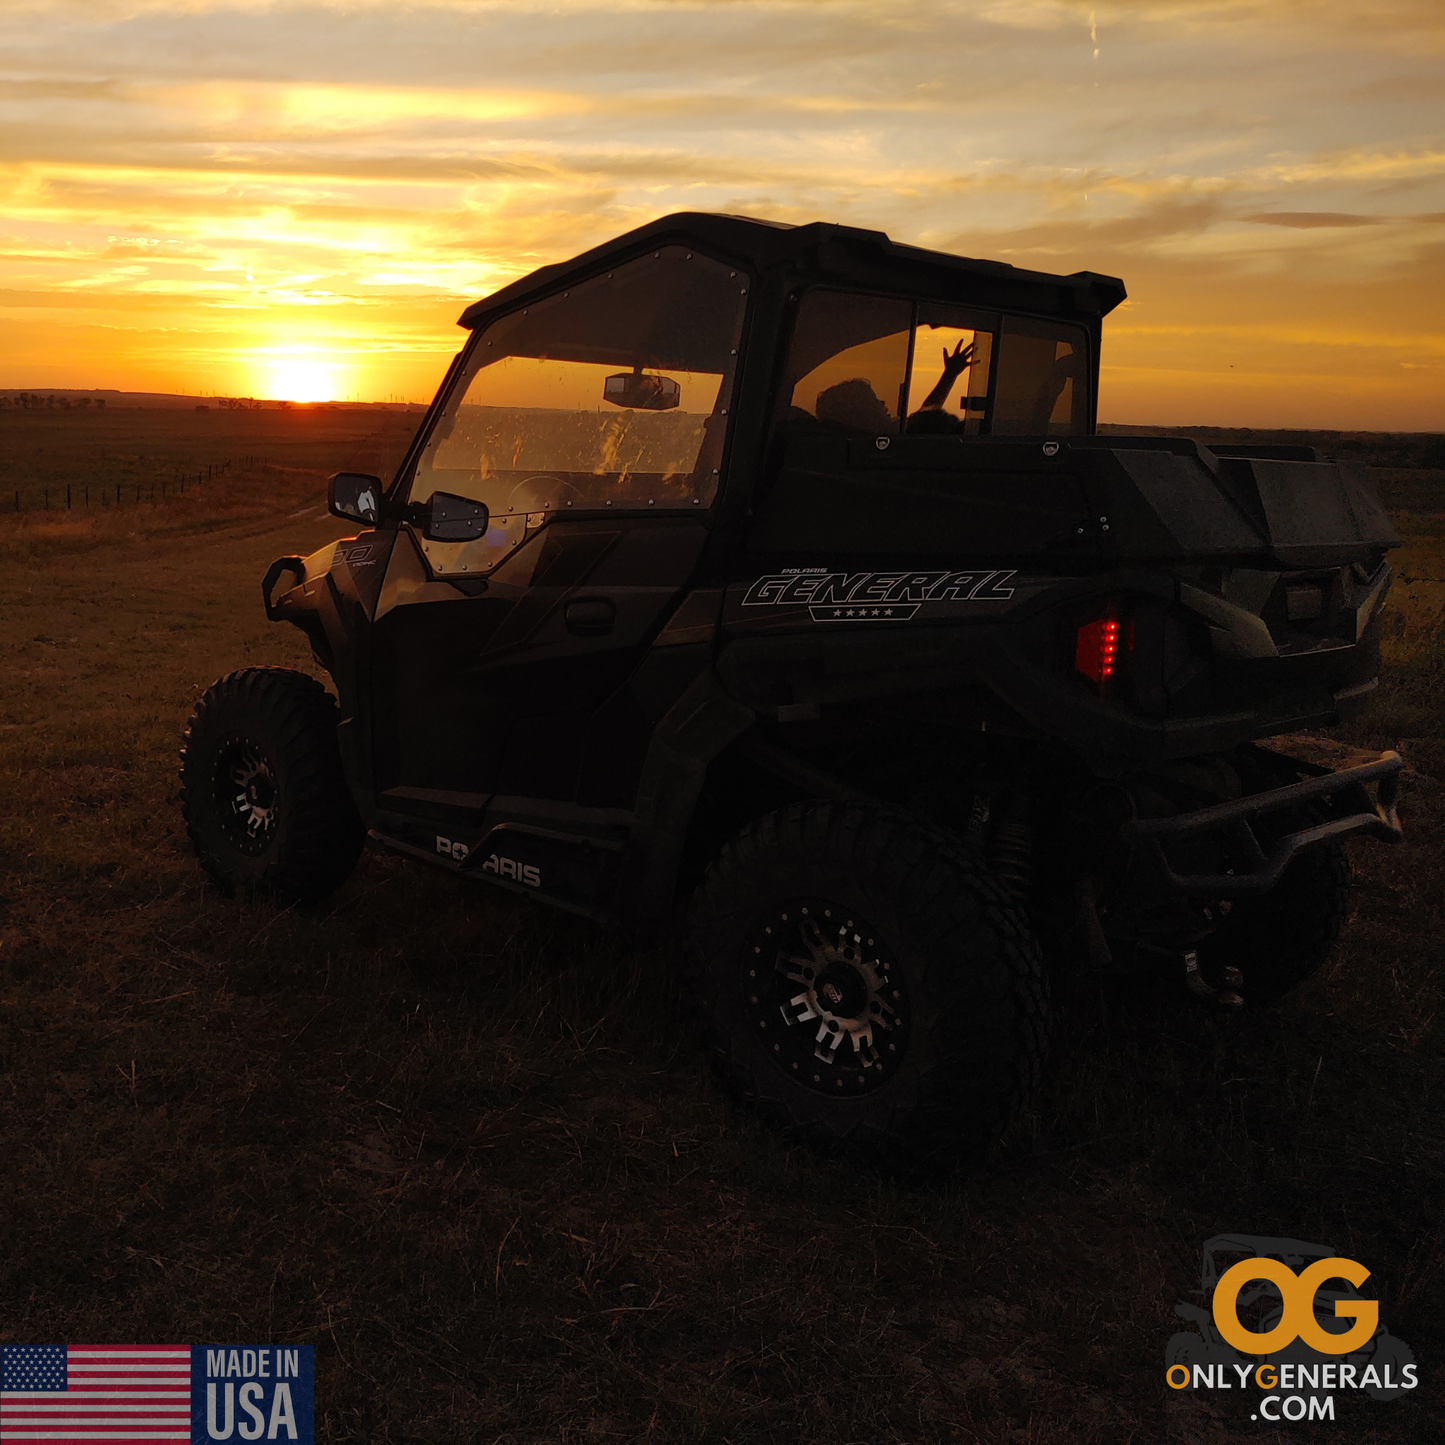 No place we'd rather be than with our Polaris General and OnlyGenerals SideskinsLITE hard upper doors on an expansive sunset lit trail